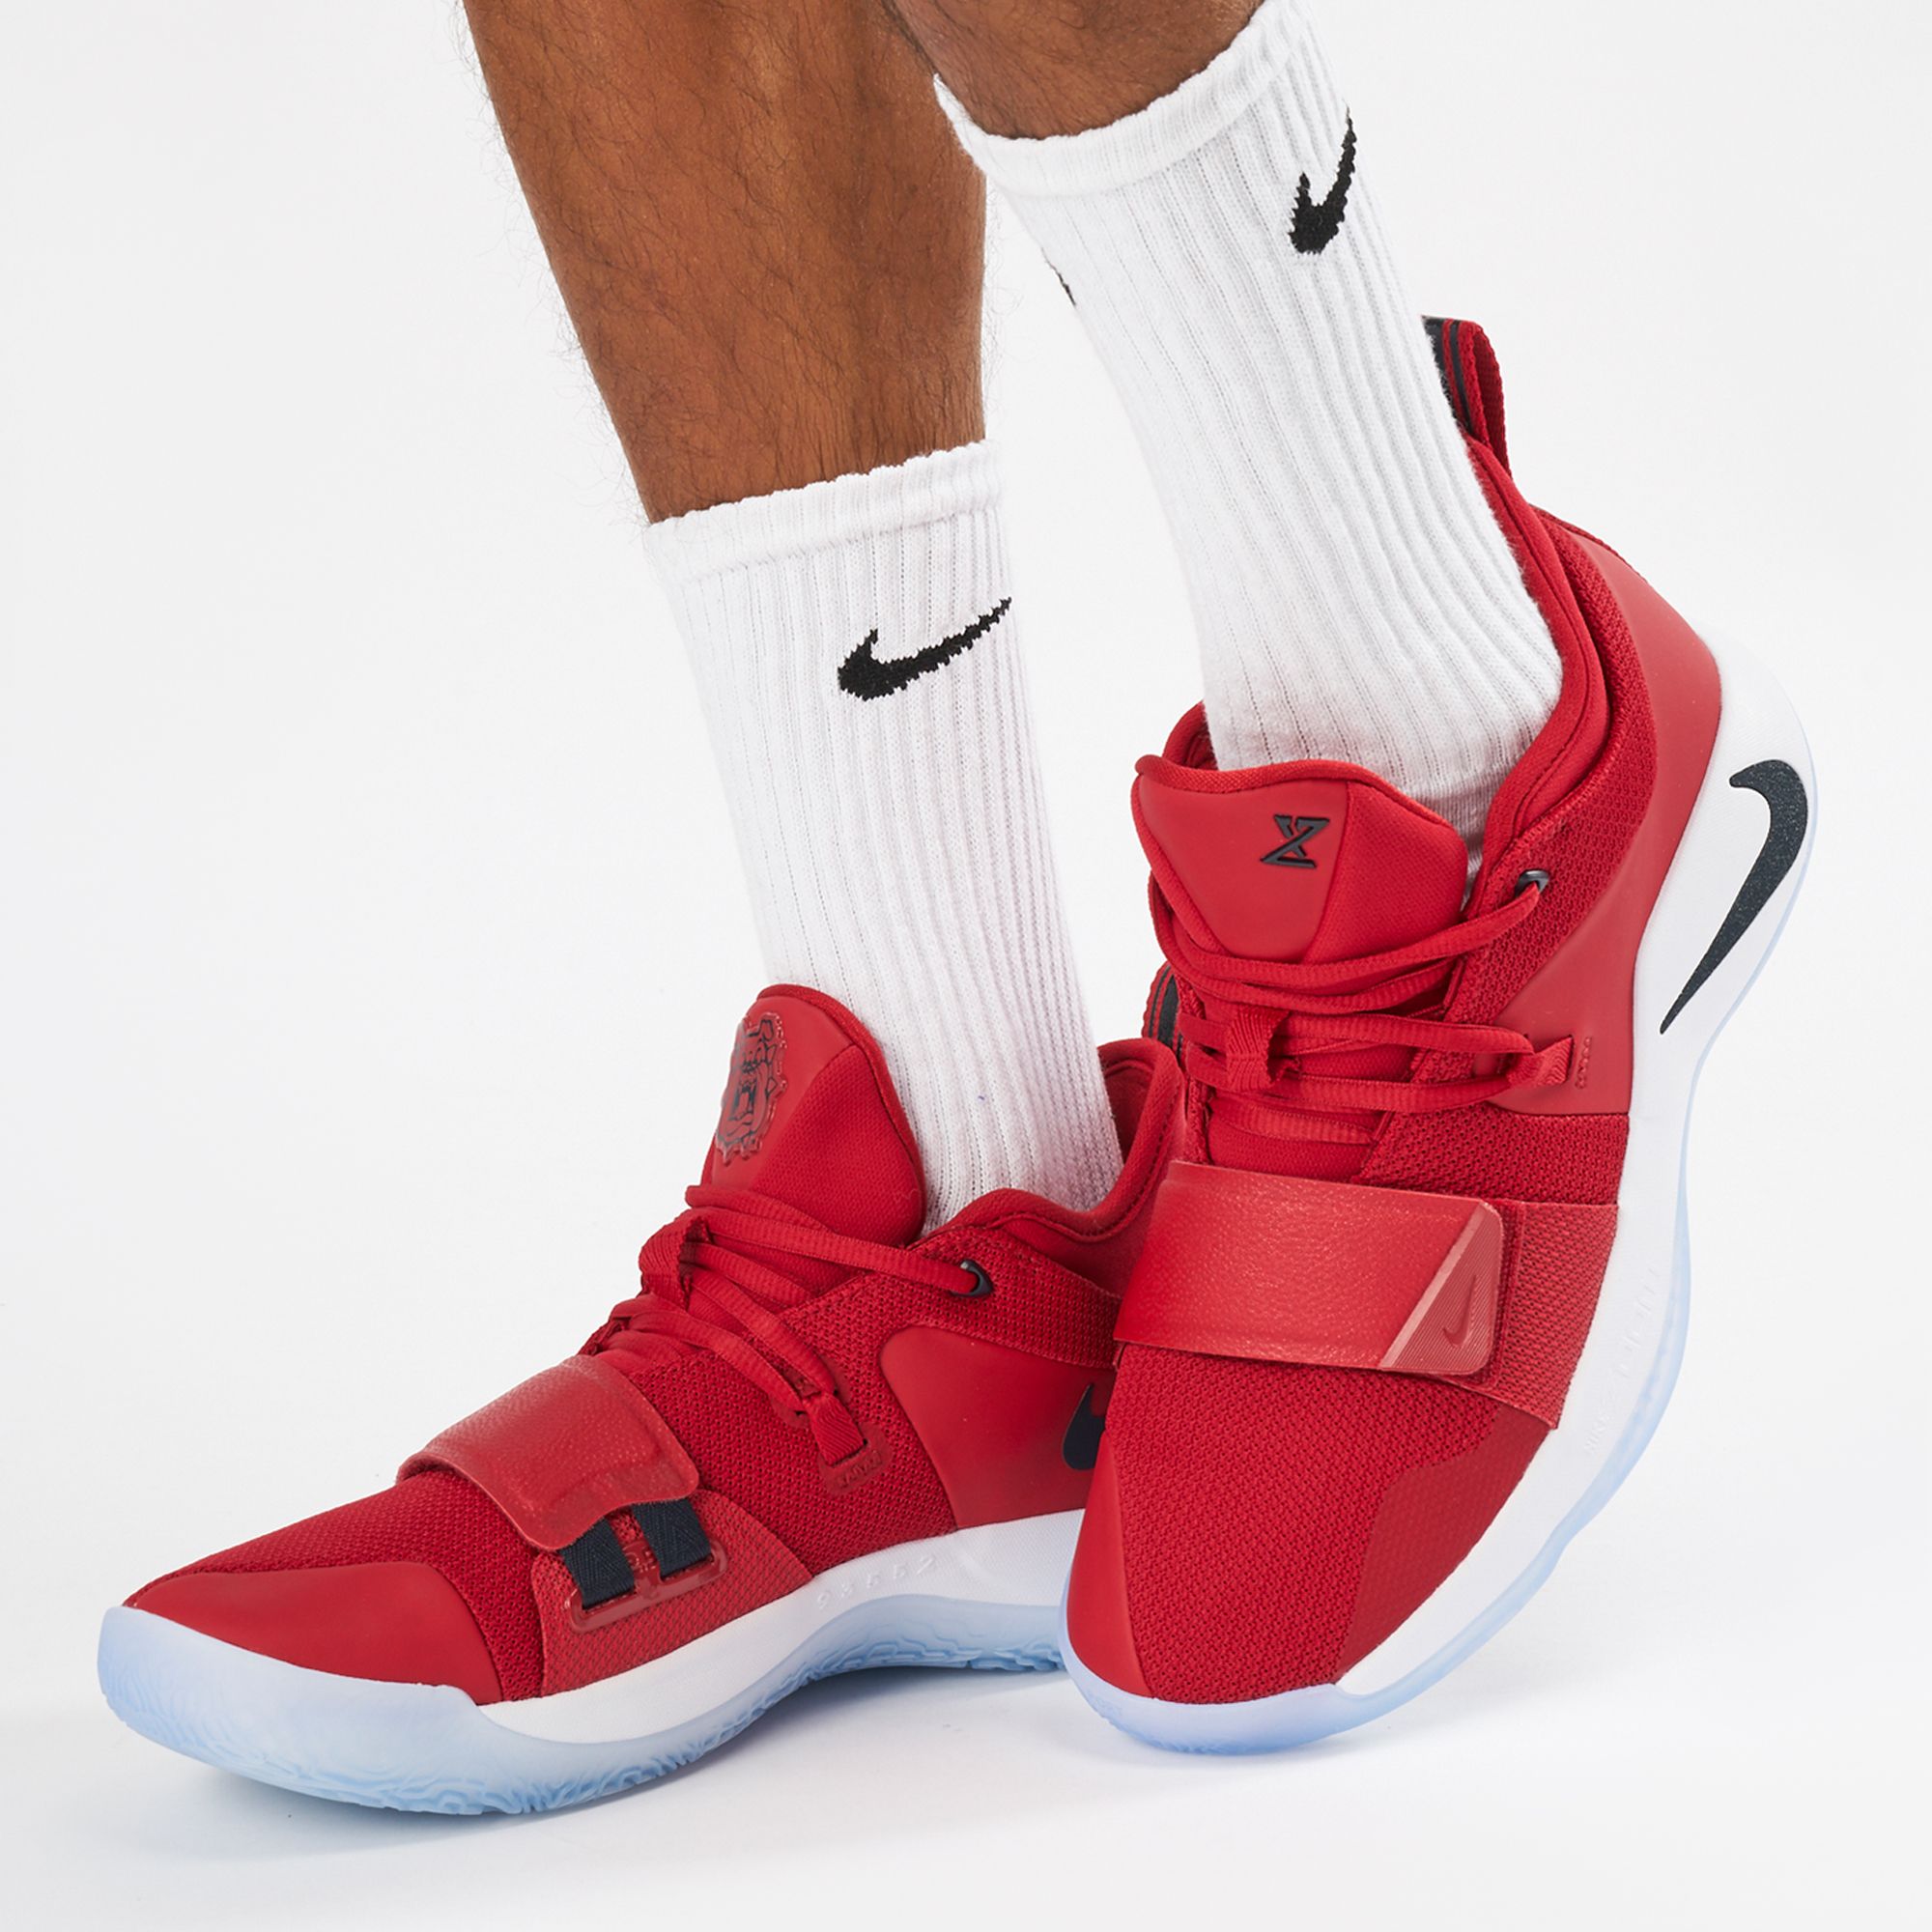 men's nike pg 2.5 Kevin Durant shoes on 